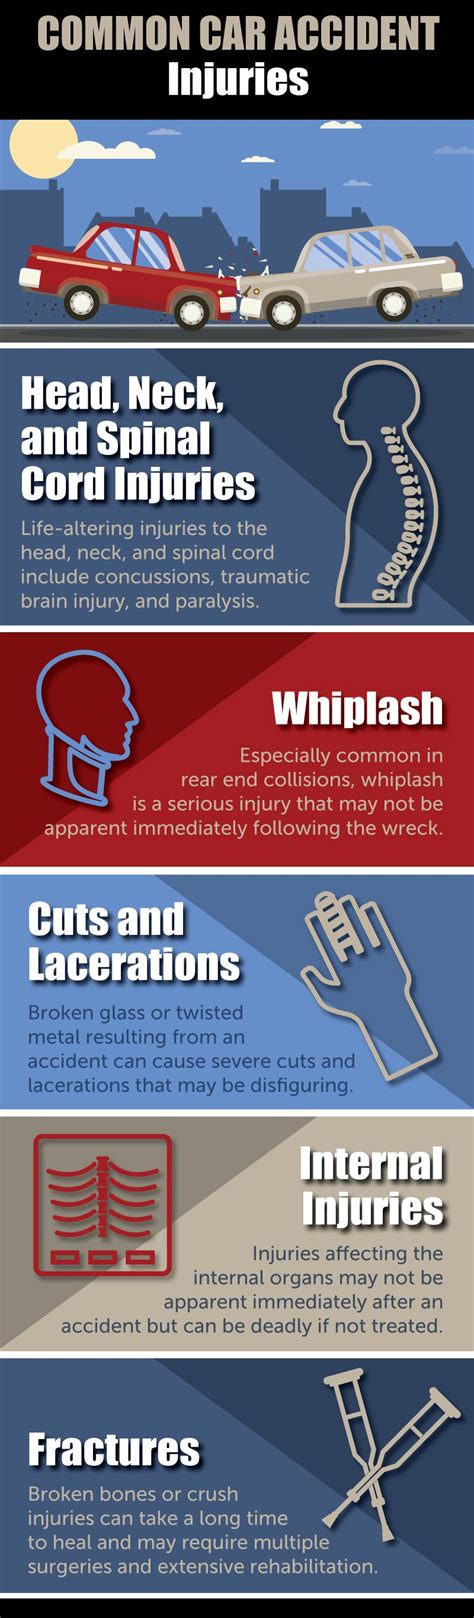 Common Car Accident Injuries The Impact Of Whiplash And Internal Damage